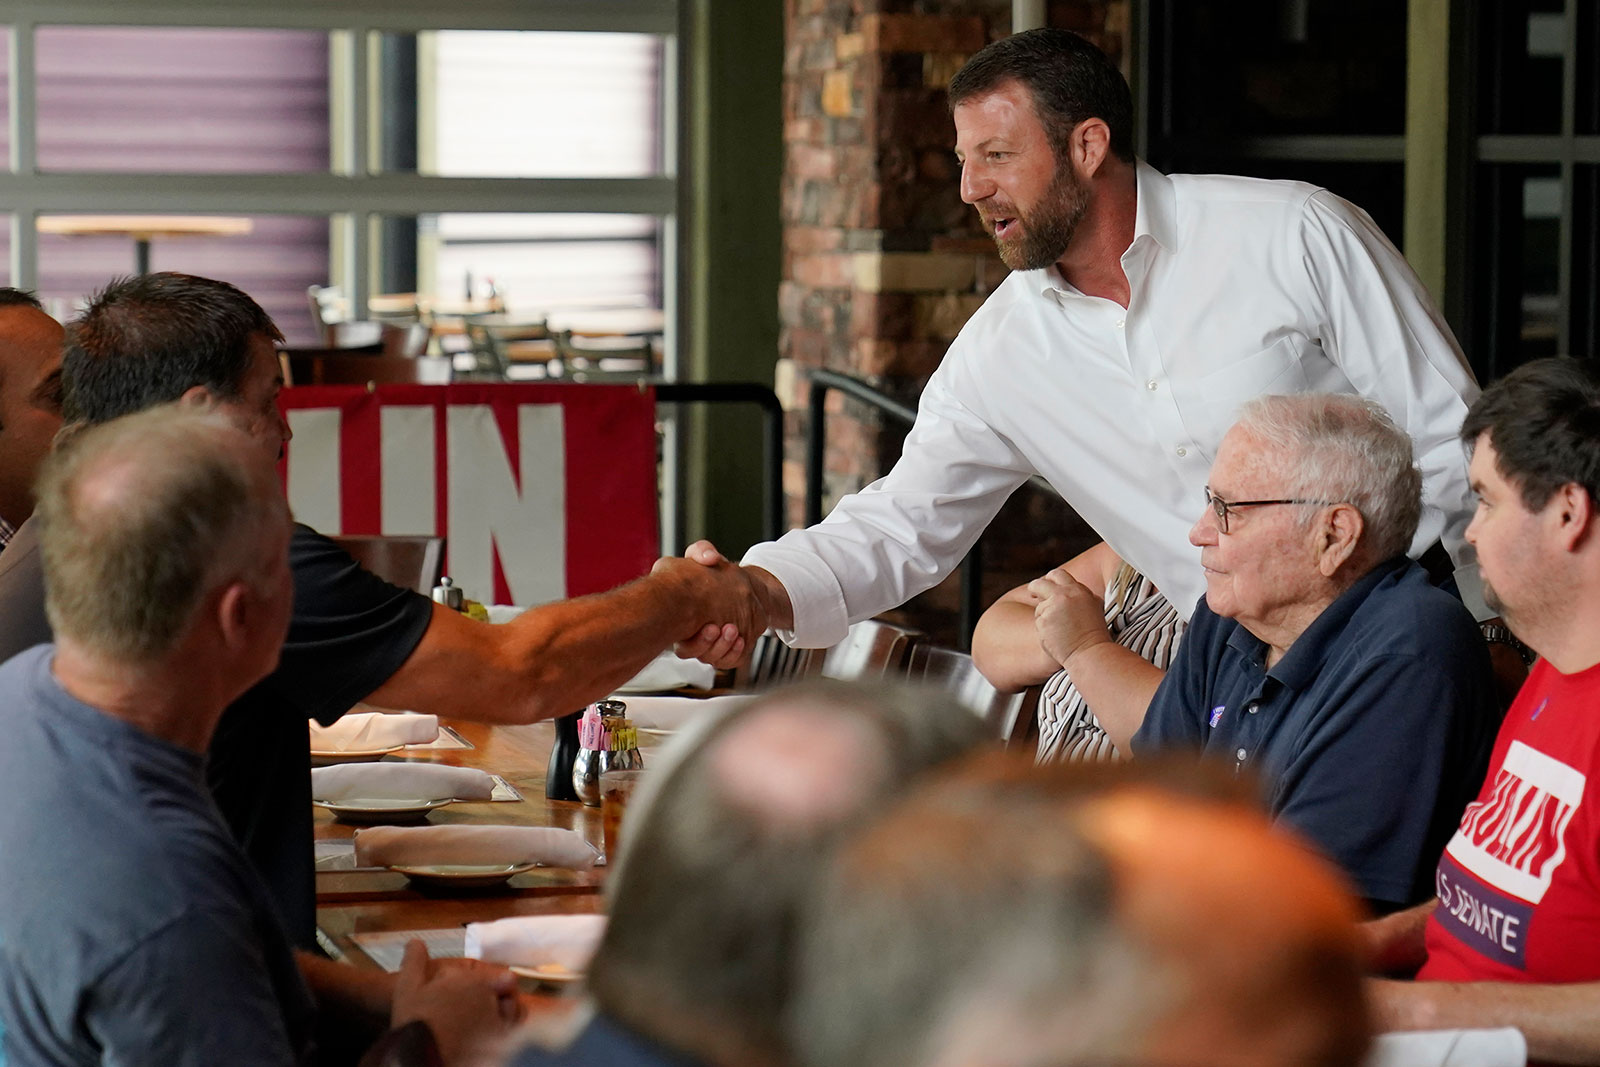 Rep. Markwayne Mullin speaks with supporters at a luncheon in Norman, Oklahoma, on Tuesday.